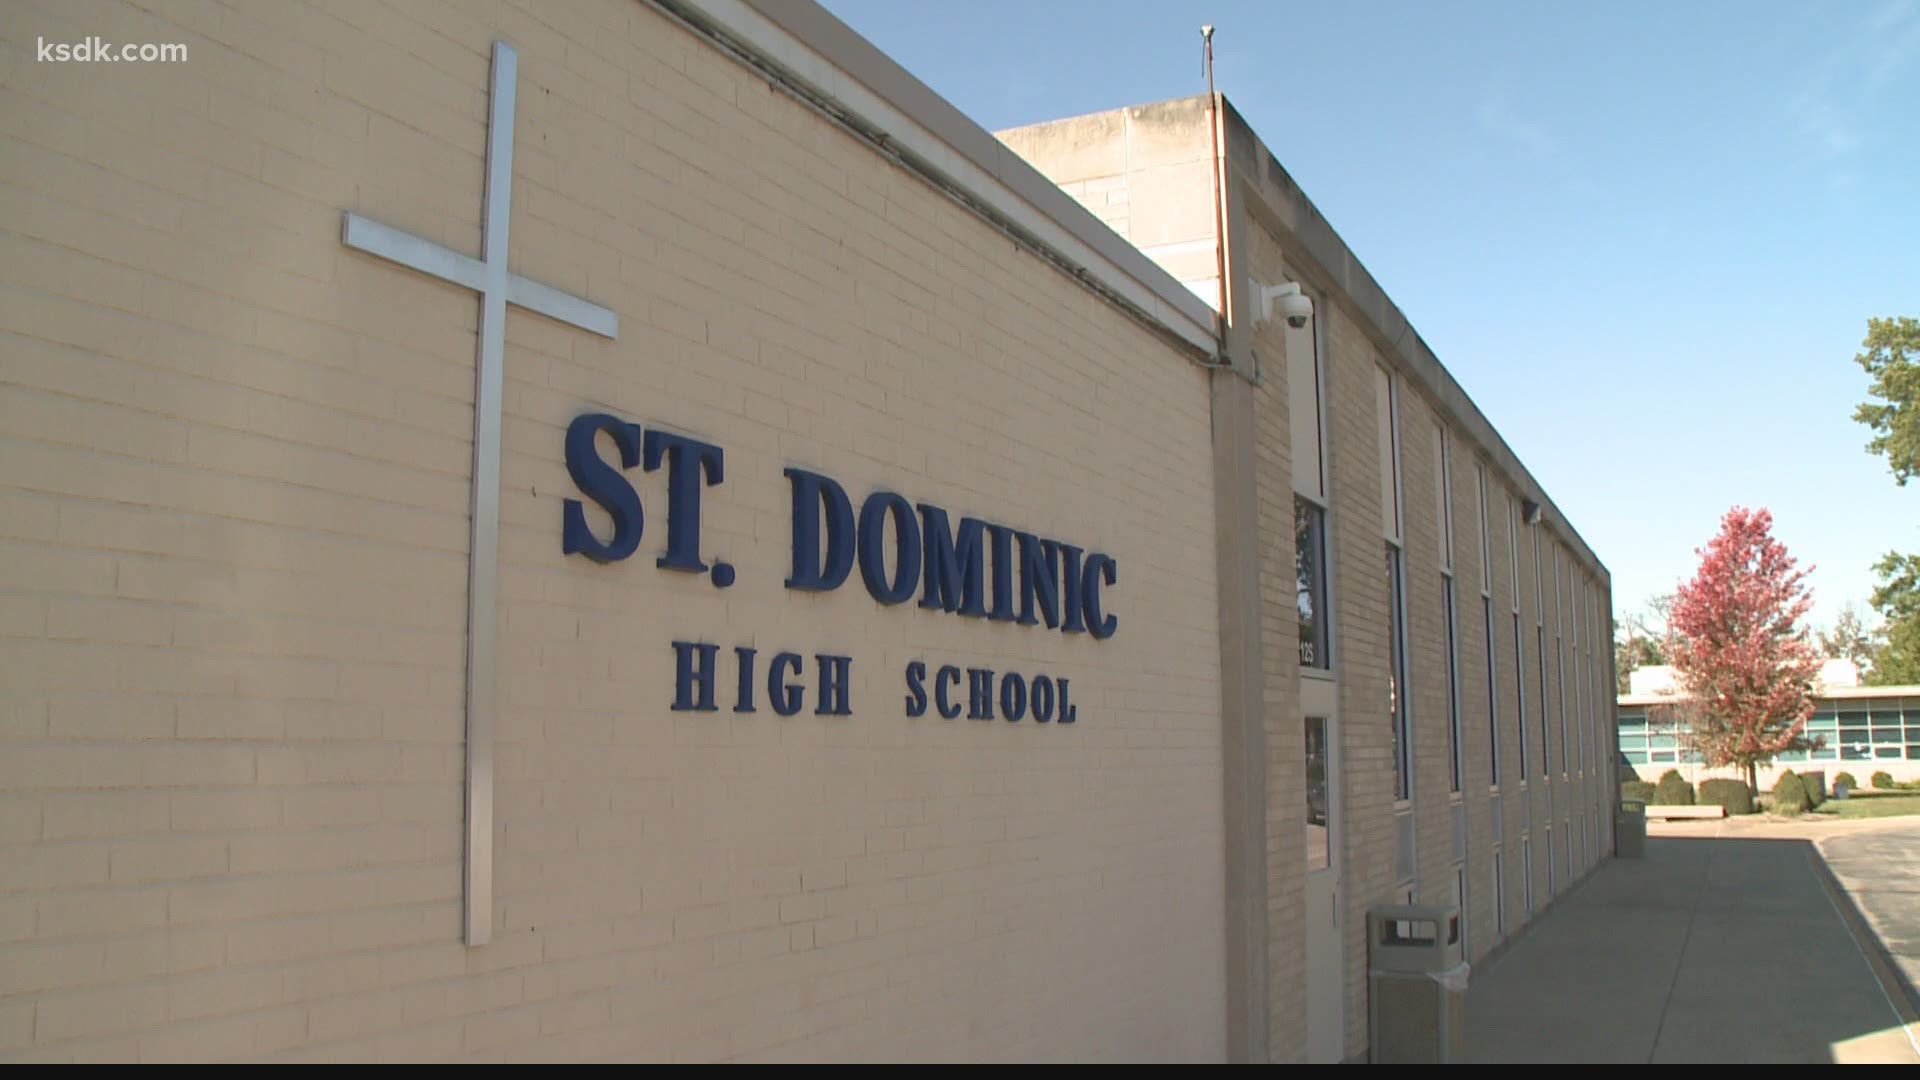 St. Dominic High School held a graduation ceremony outdoors and an off-site prom in July